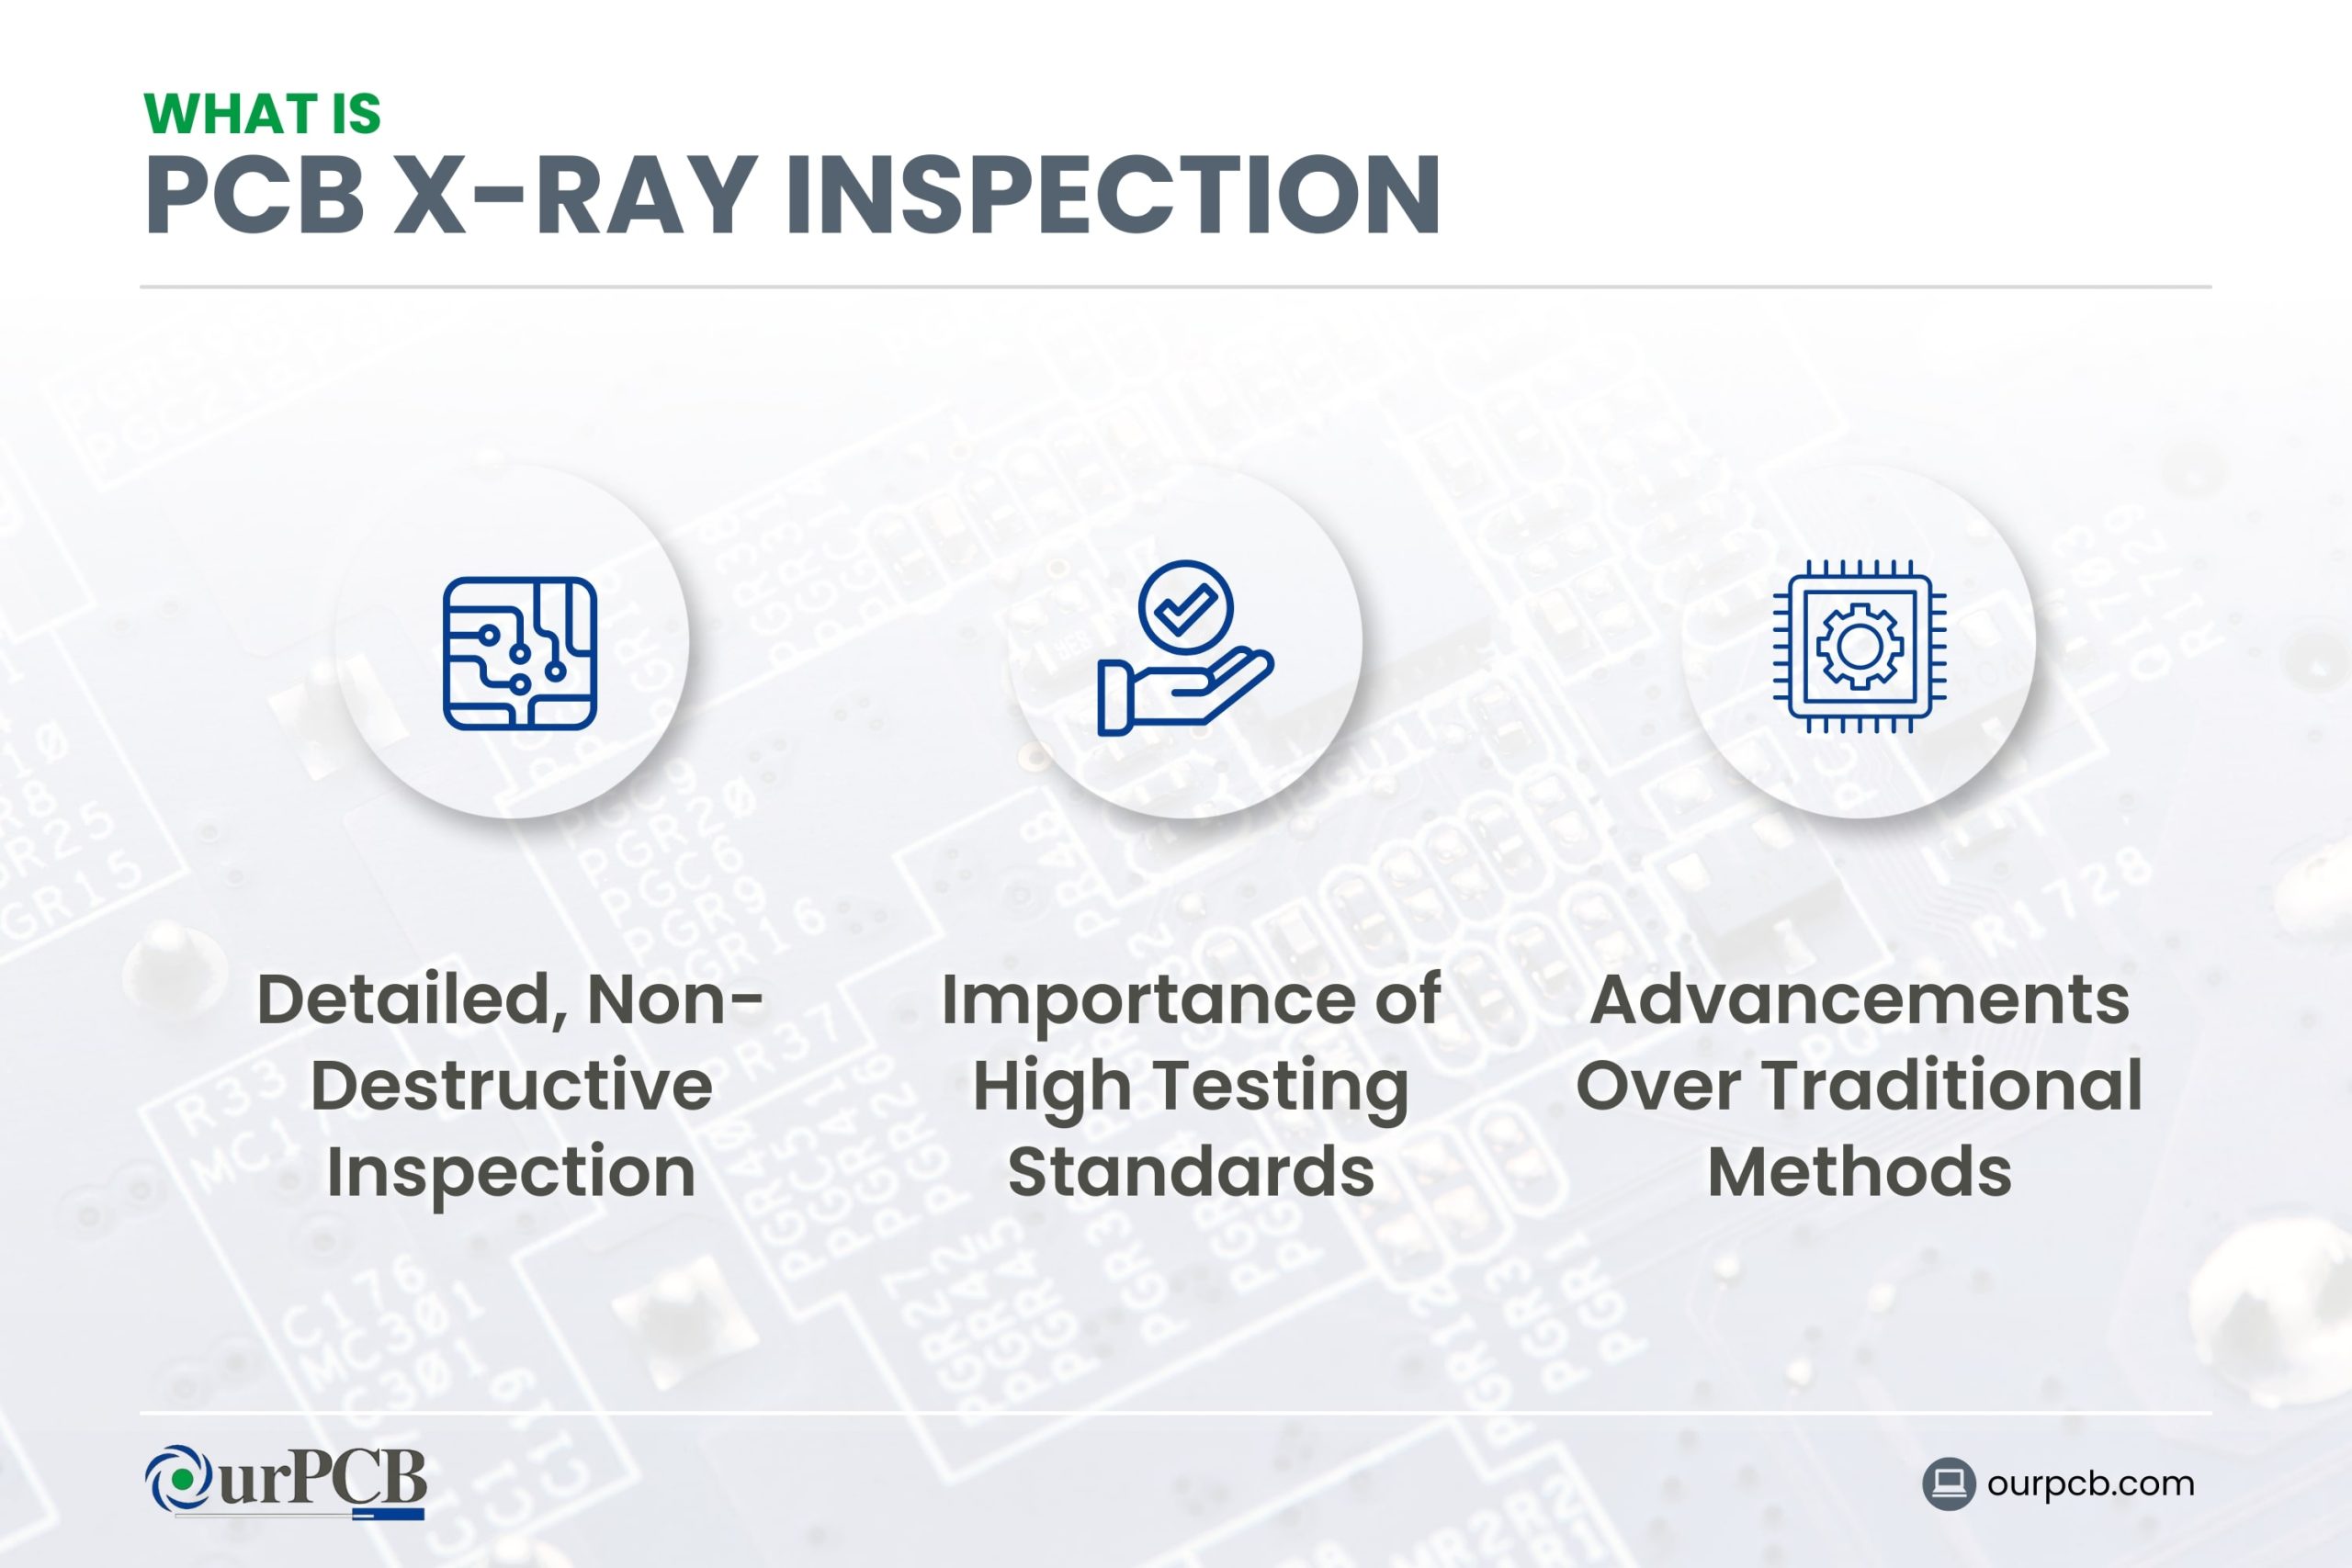 What is PCB X-Ray Inspection?